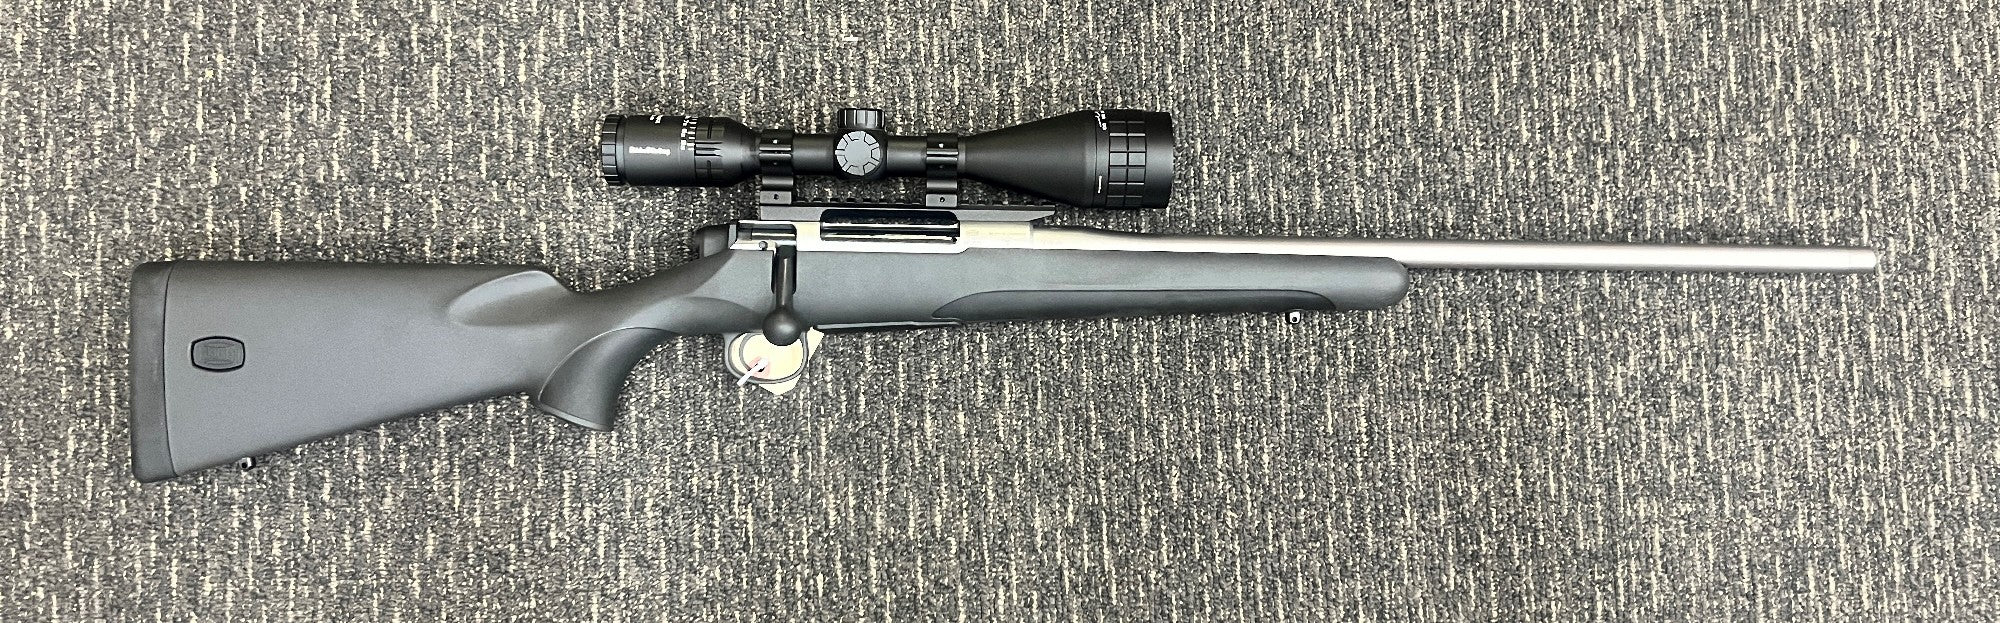 MAUSER M18 STAINLESS THREADED 223 REM NIKKO 4.5-14X50 SCOPE PACKAGE